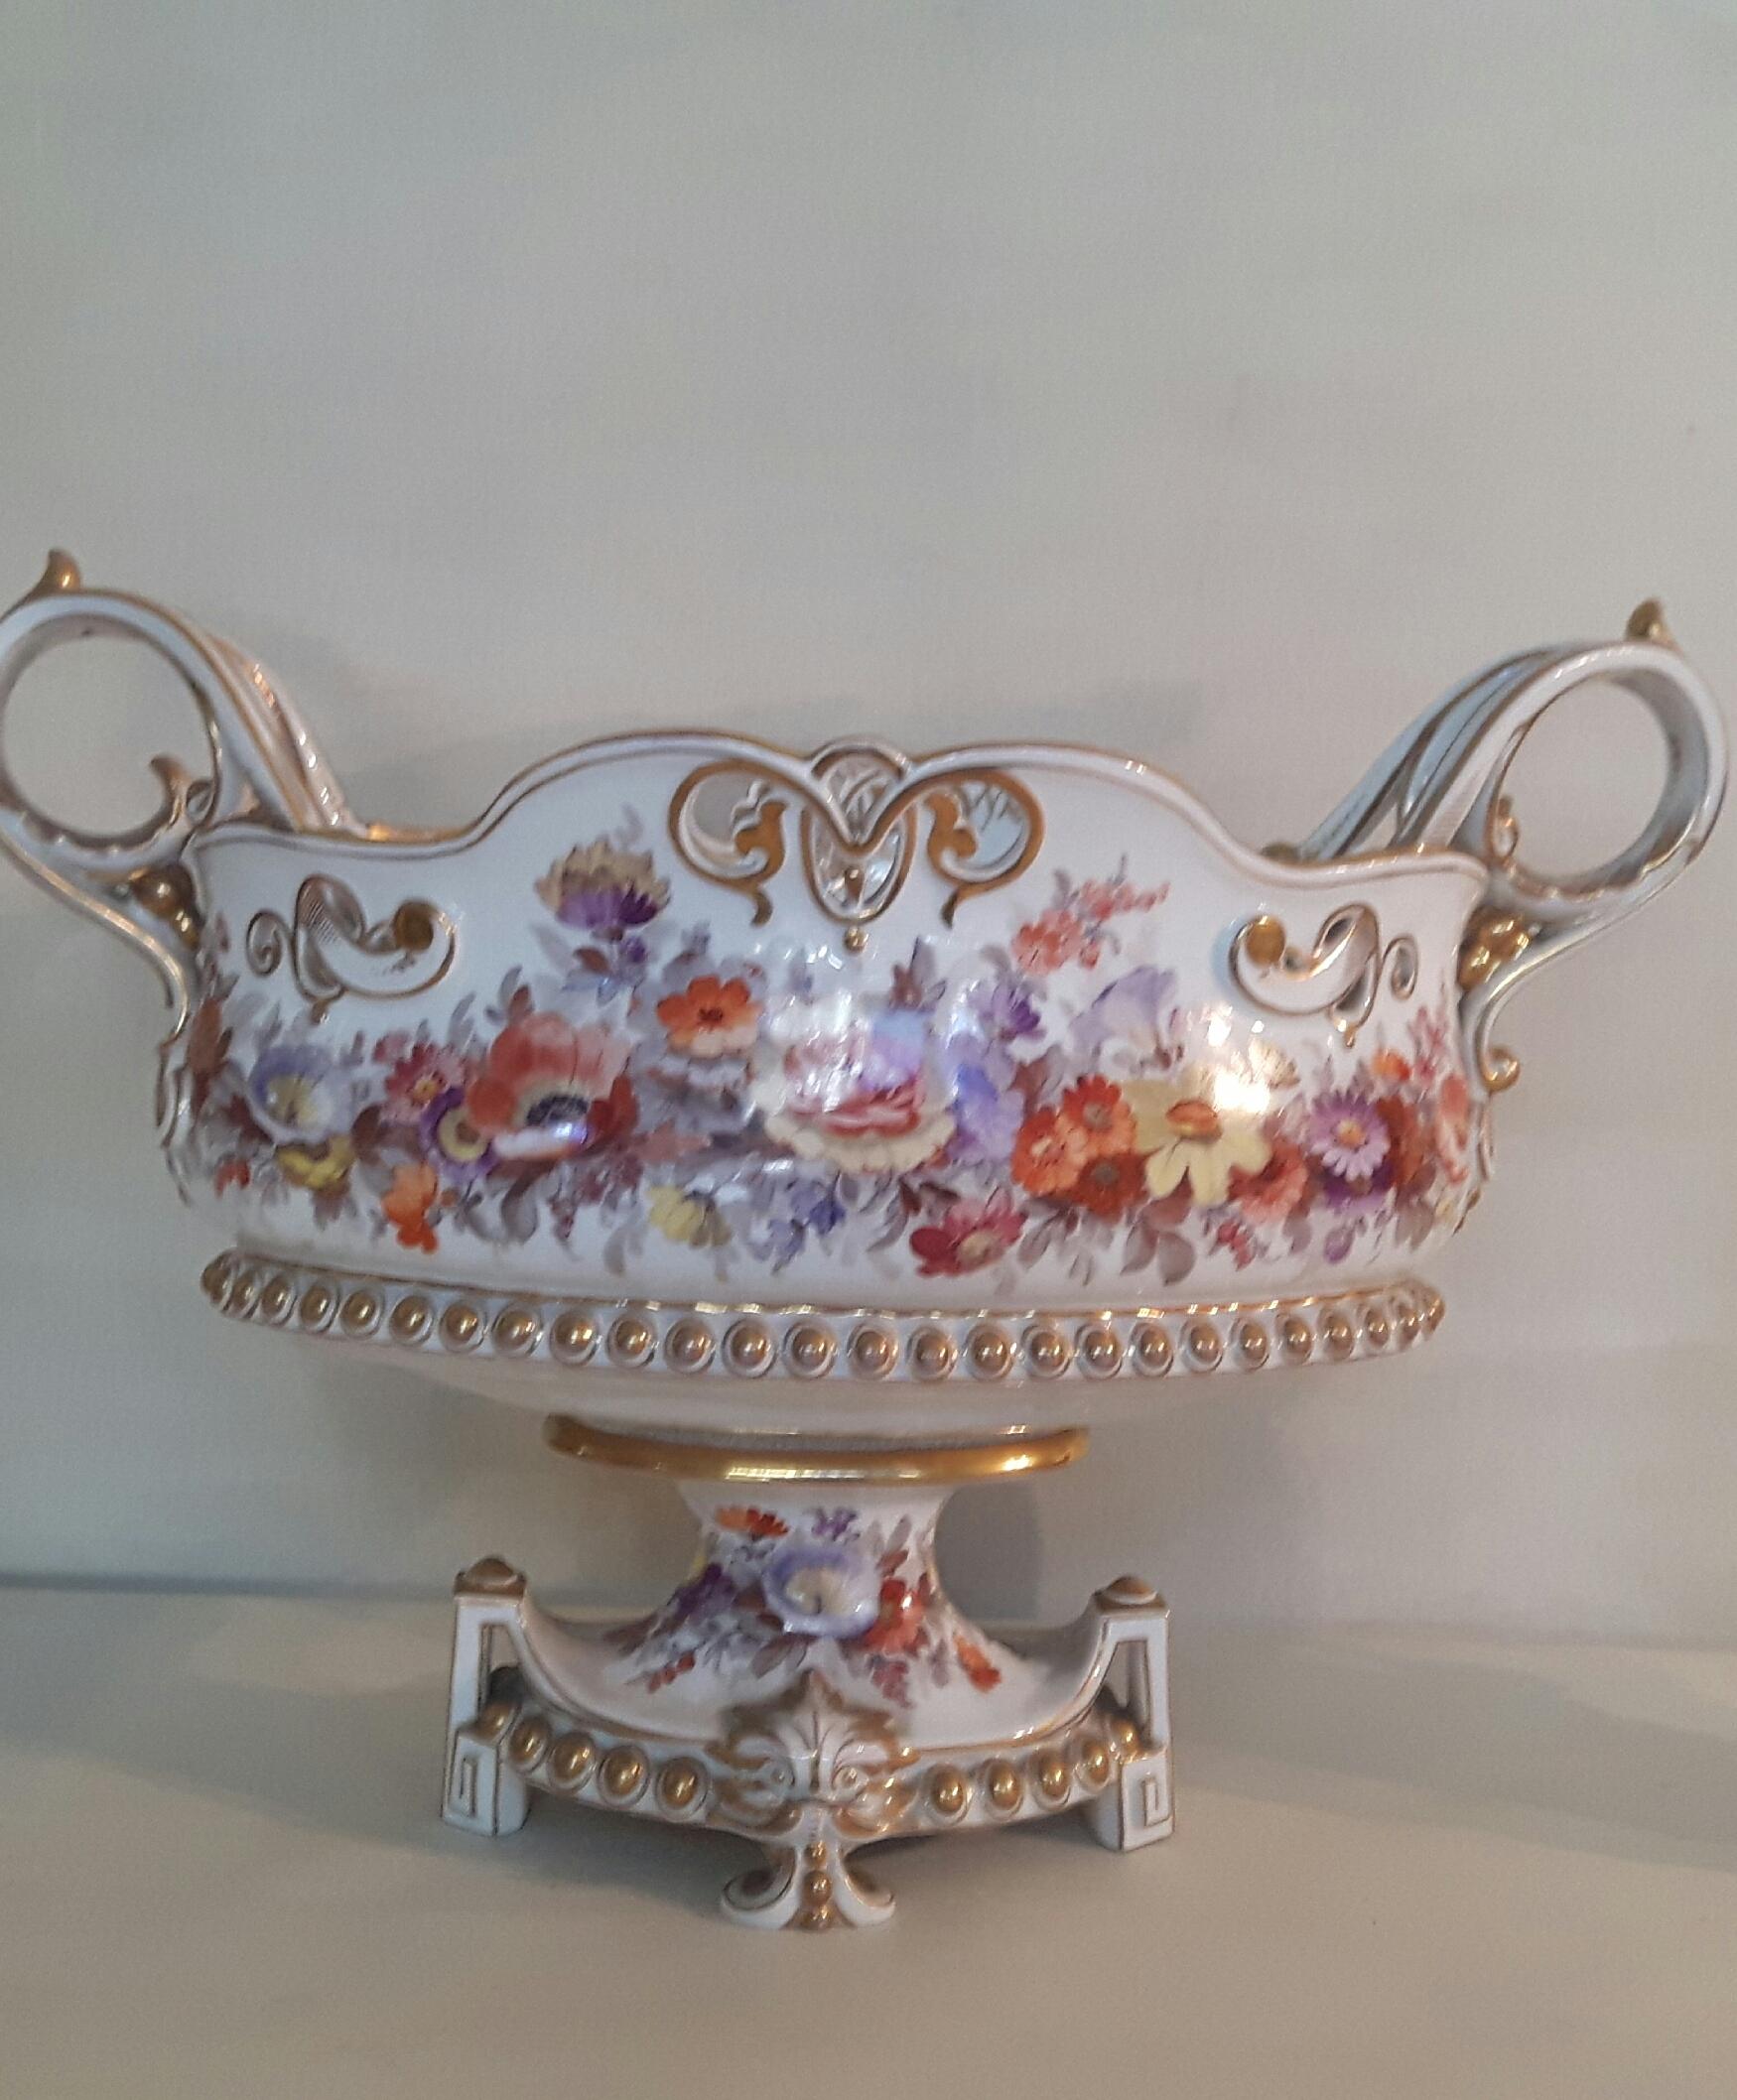 Porcelain Early 20th Century Berlin Center Piece For Sale